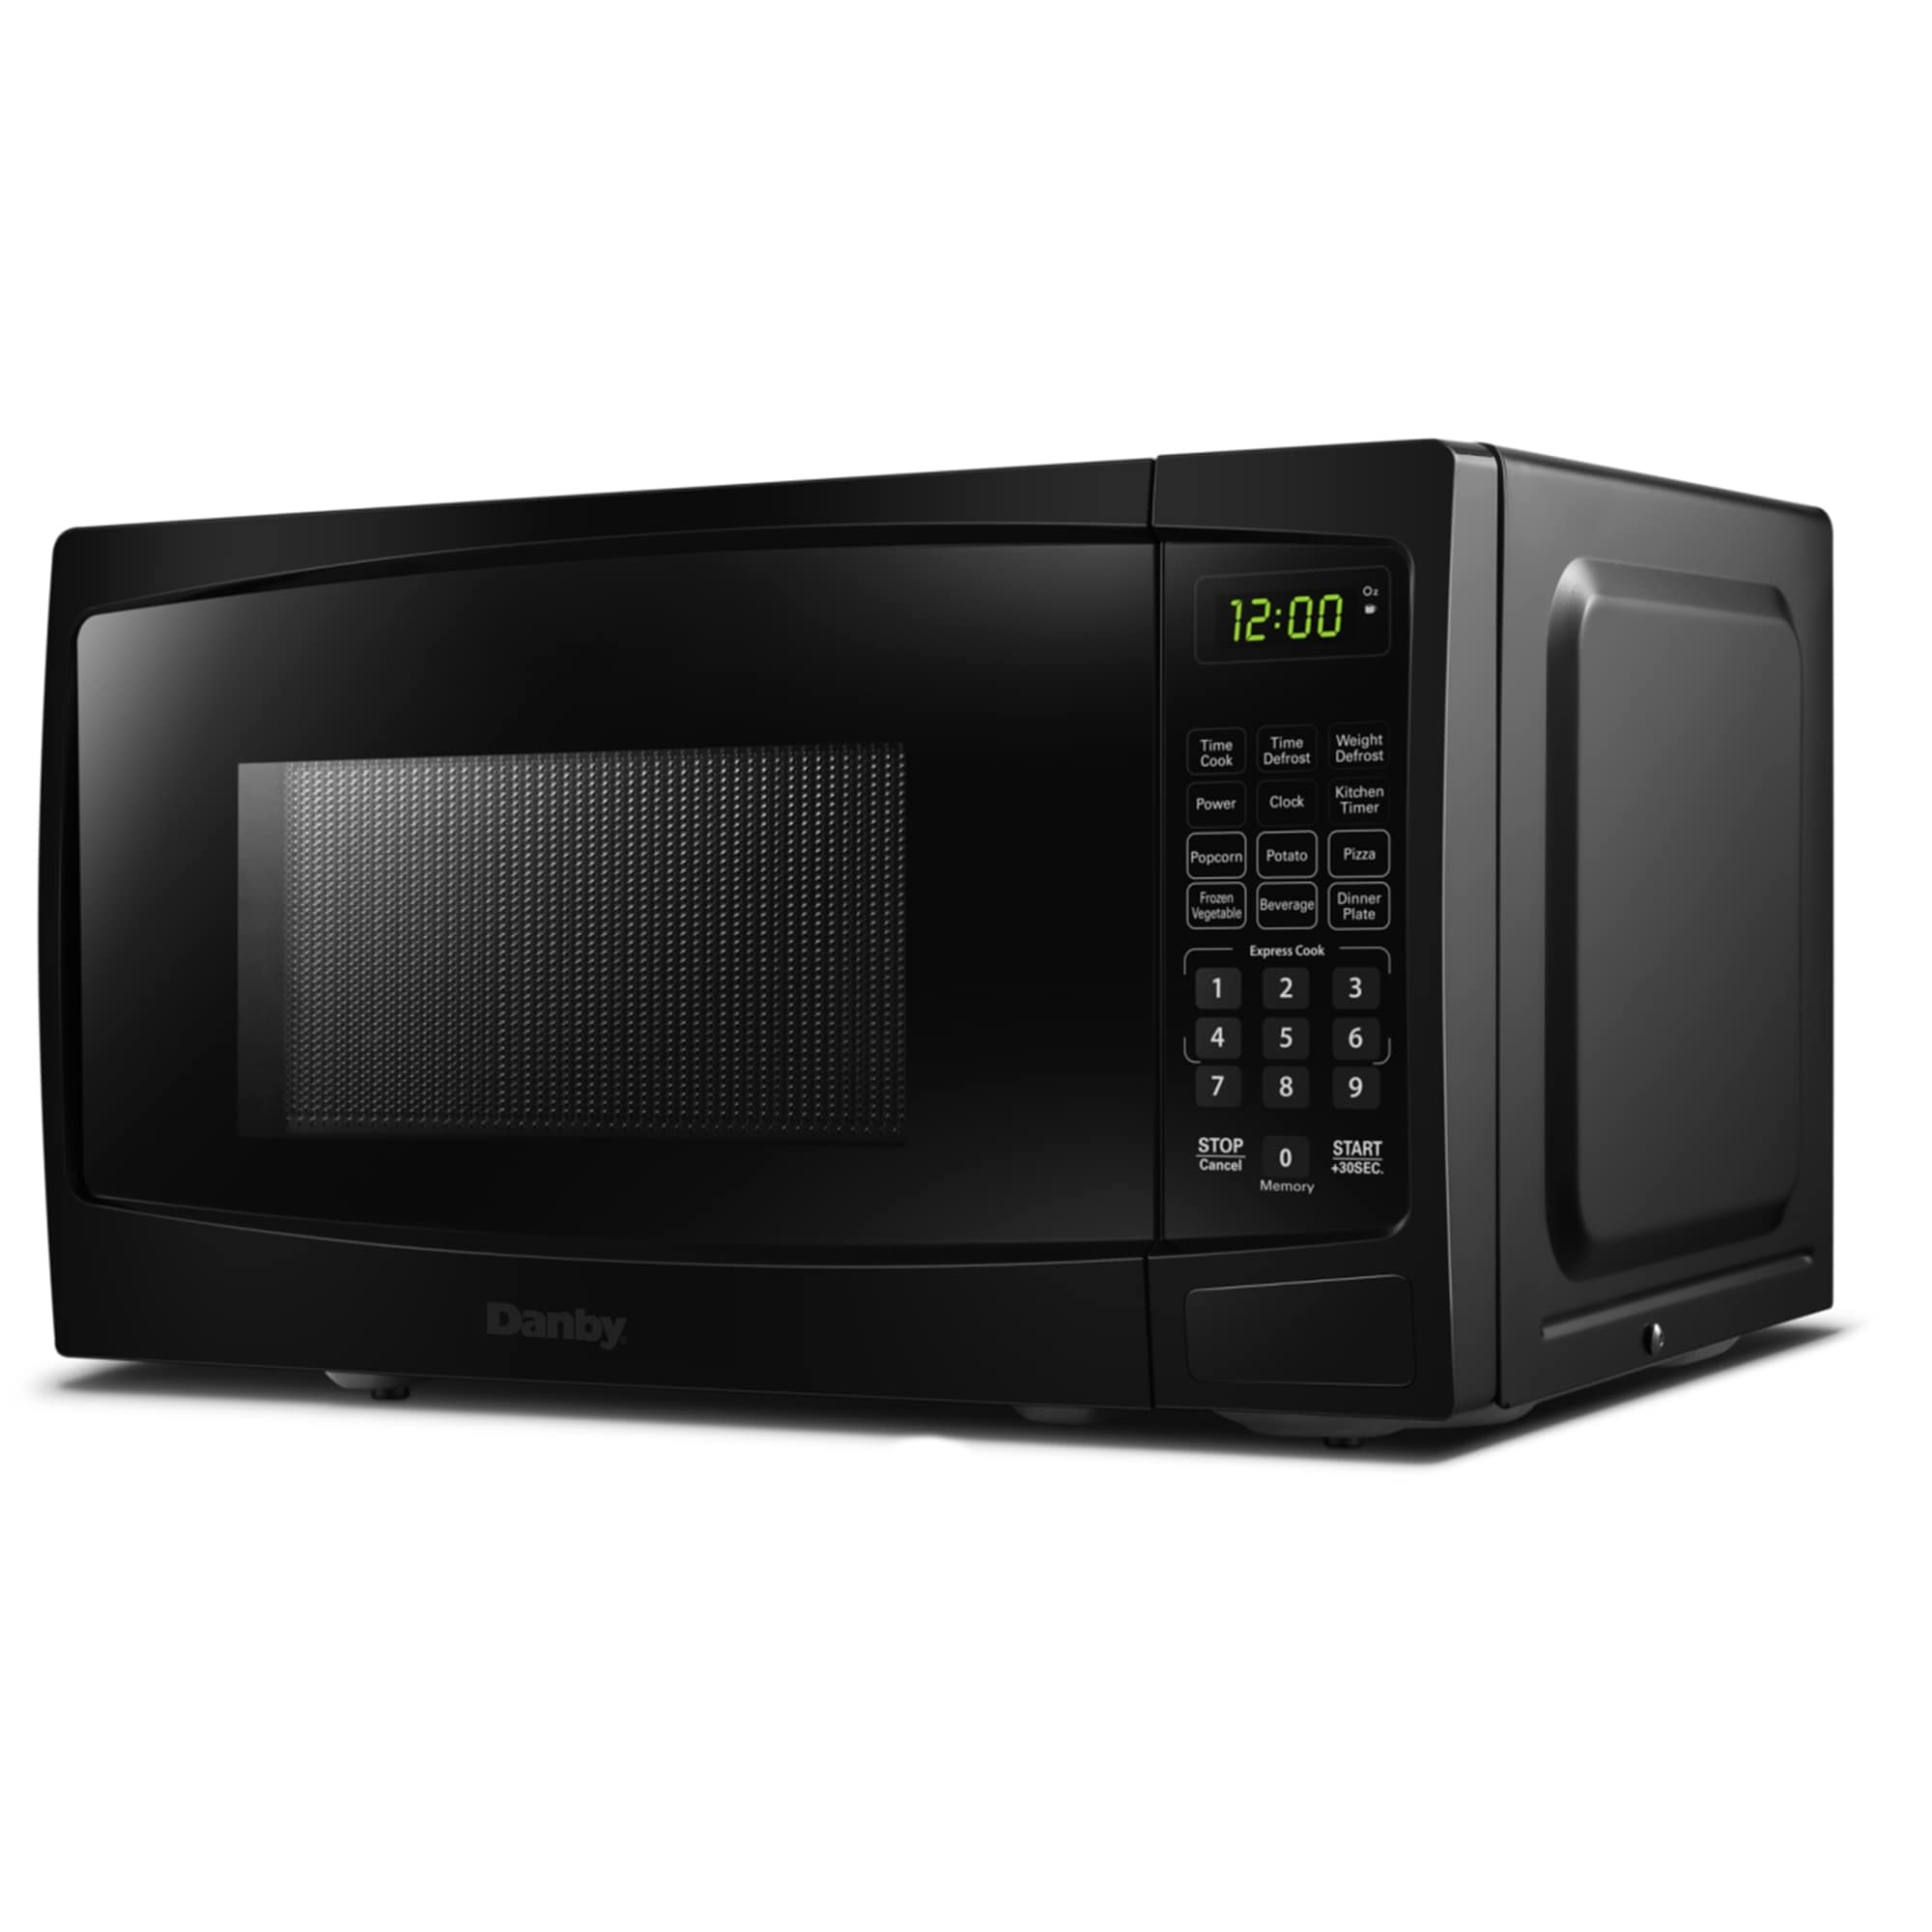 https://ak1.ostkcdn.com/images/products/is/images/direct/6a3ce9bc6bae99d00122626843fbad1336738630/Danby-0.7-cuft-Black-Microwave.jpg